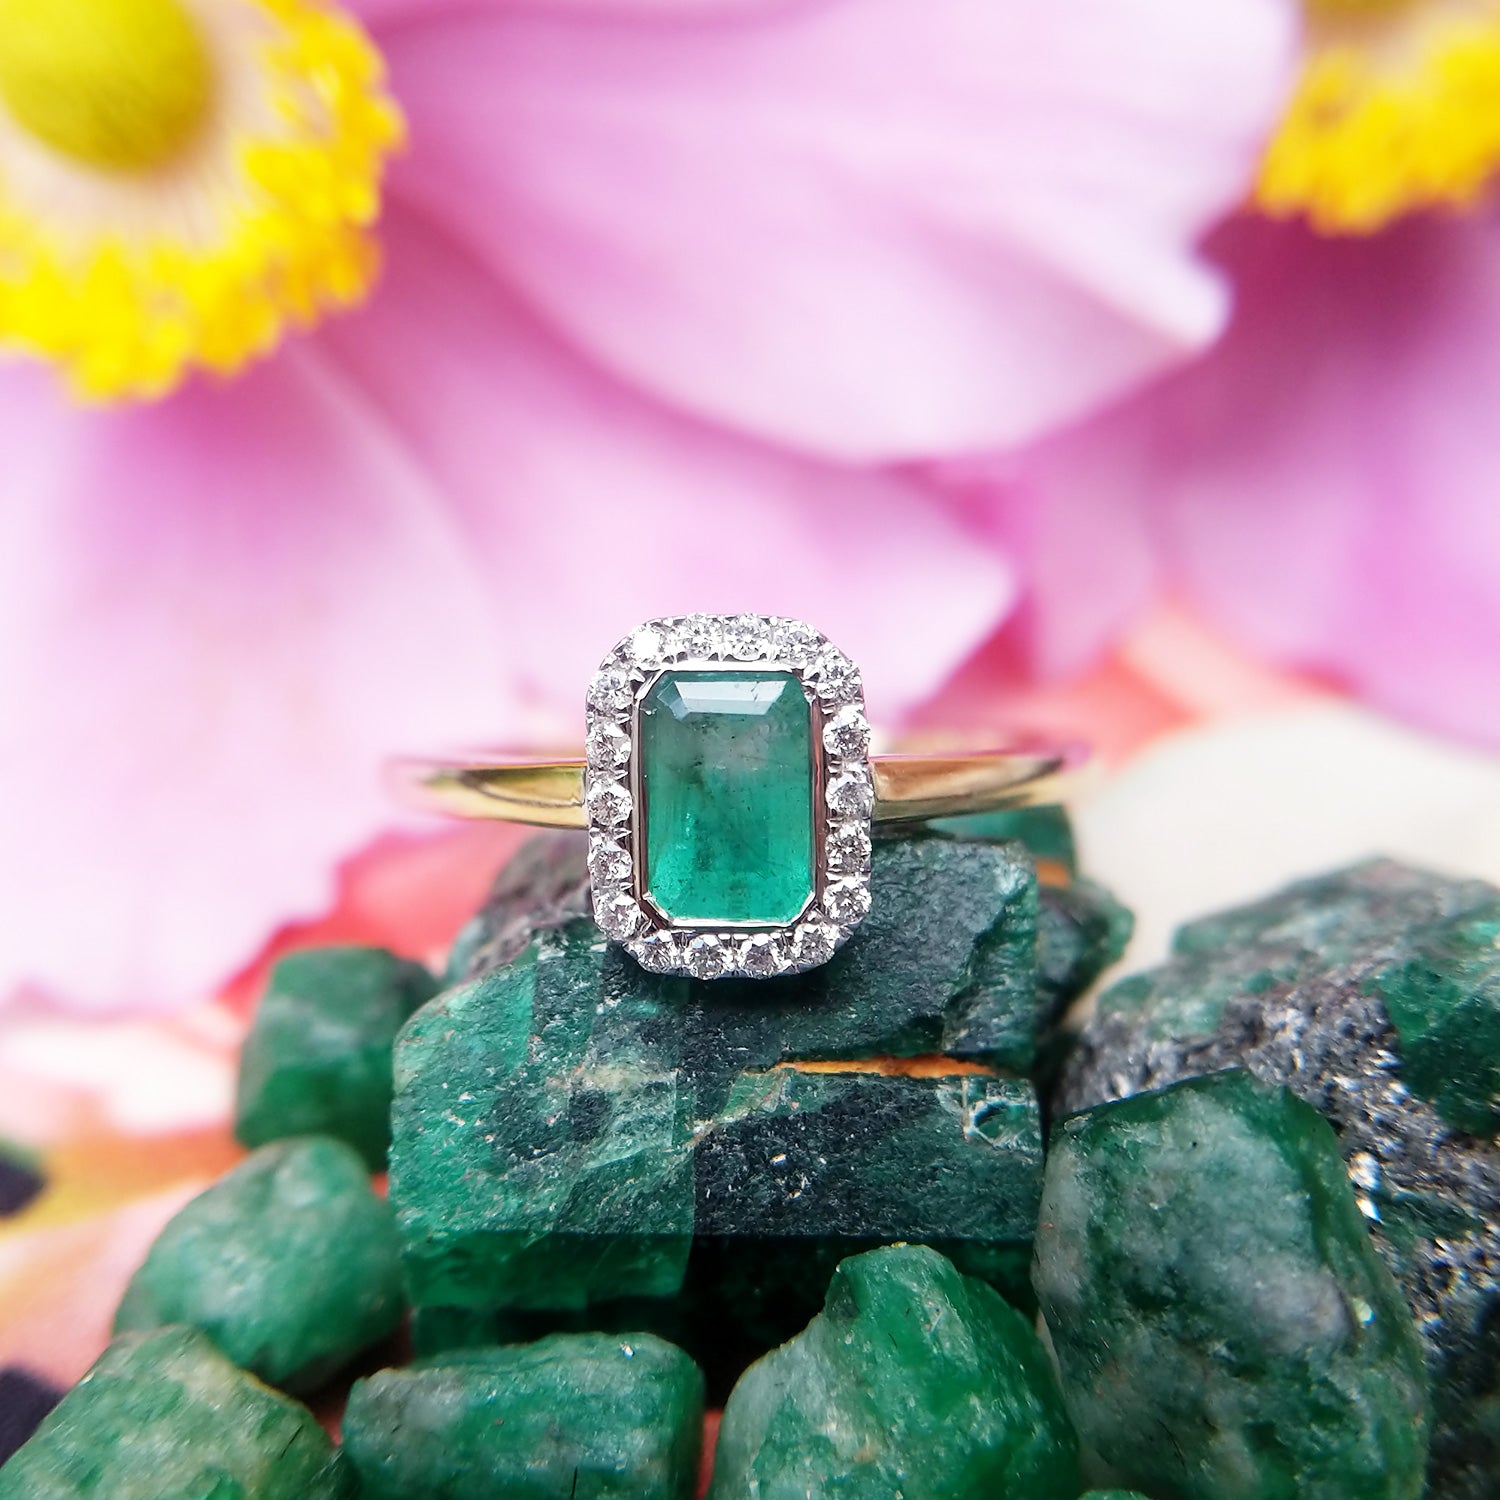 Buy Emerald Ring, Cocktail Ring, Large Statement Ring, Emerald Green Stone  Ring, Oversize Rectangle Ring, Antique Silver Ring,wedding Ring SOR65  Online in India - Etsy